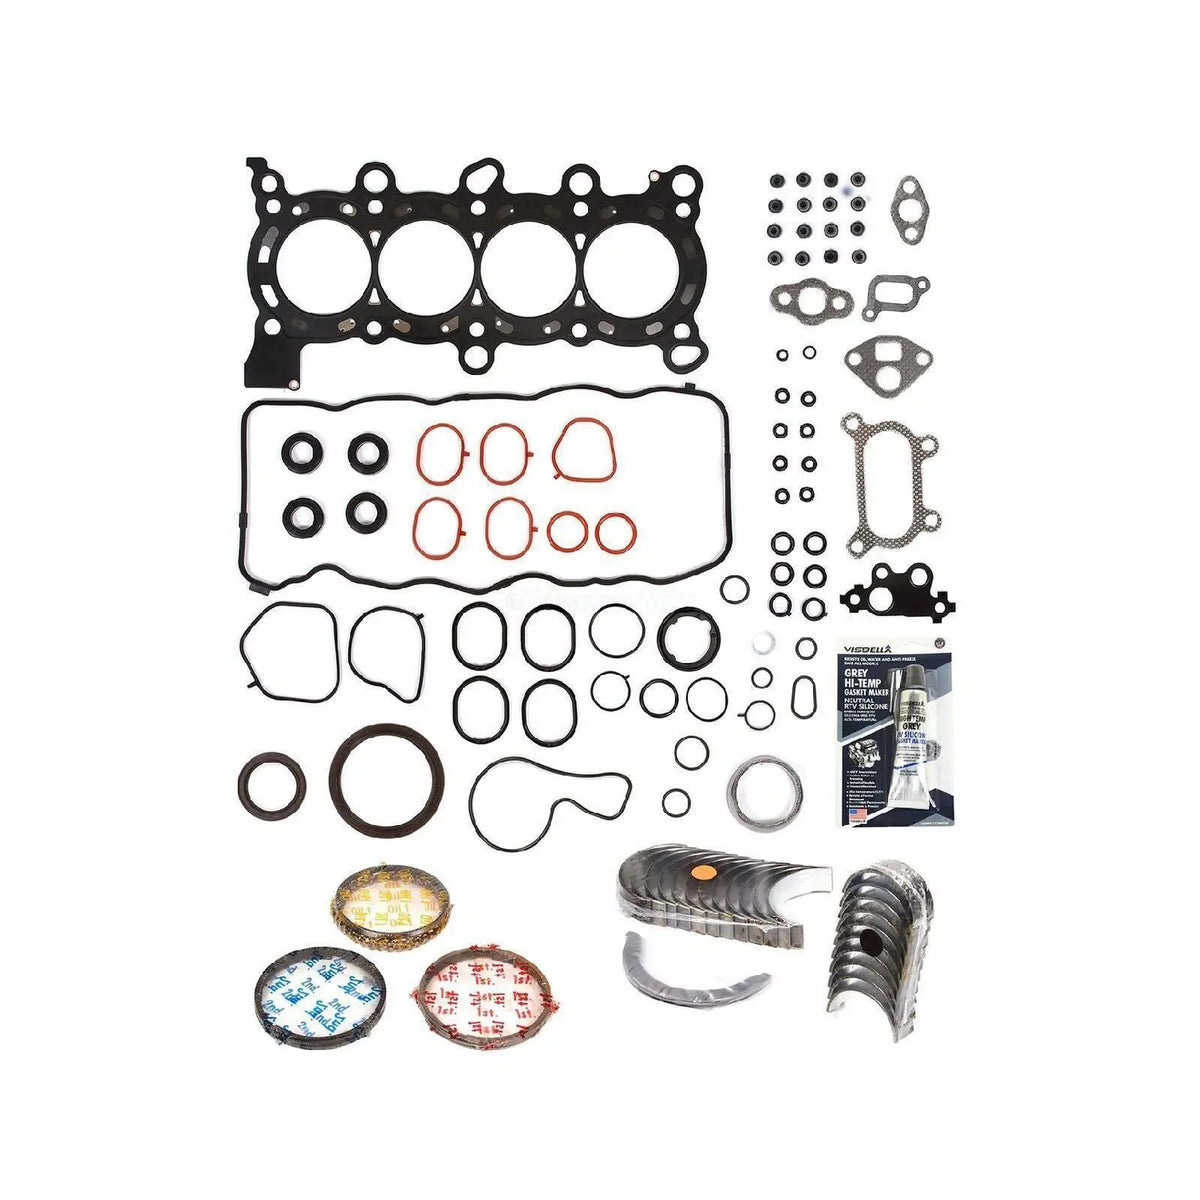 New Replacement for OE Head Gasket MLS Set Fits Honda Civic DX EX LX GX 1.8L SOHC 16 Valve R18A1 R18A4 - 2